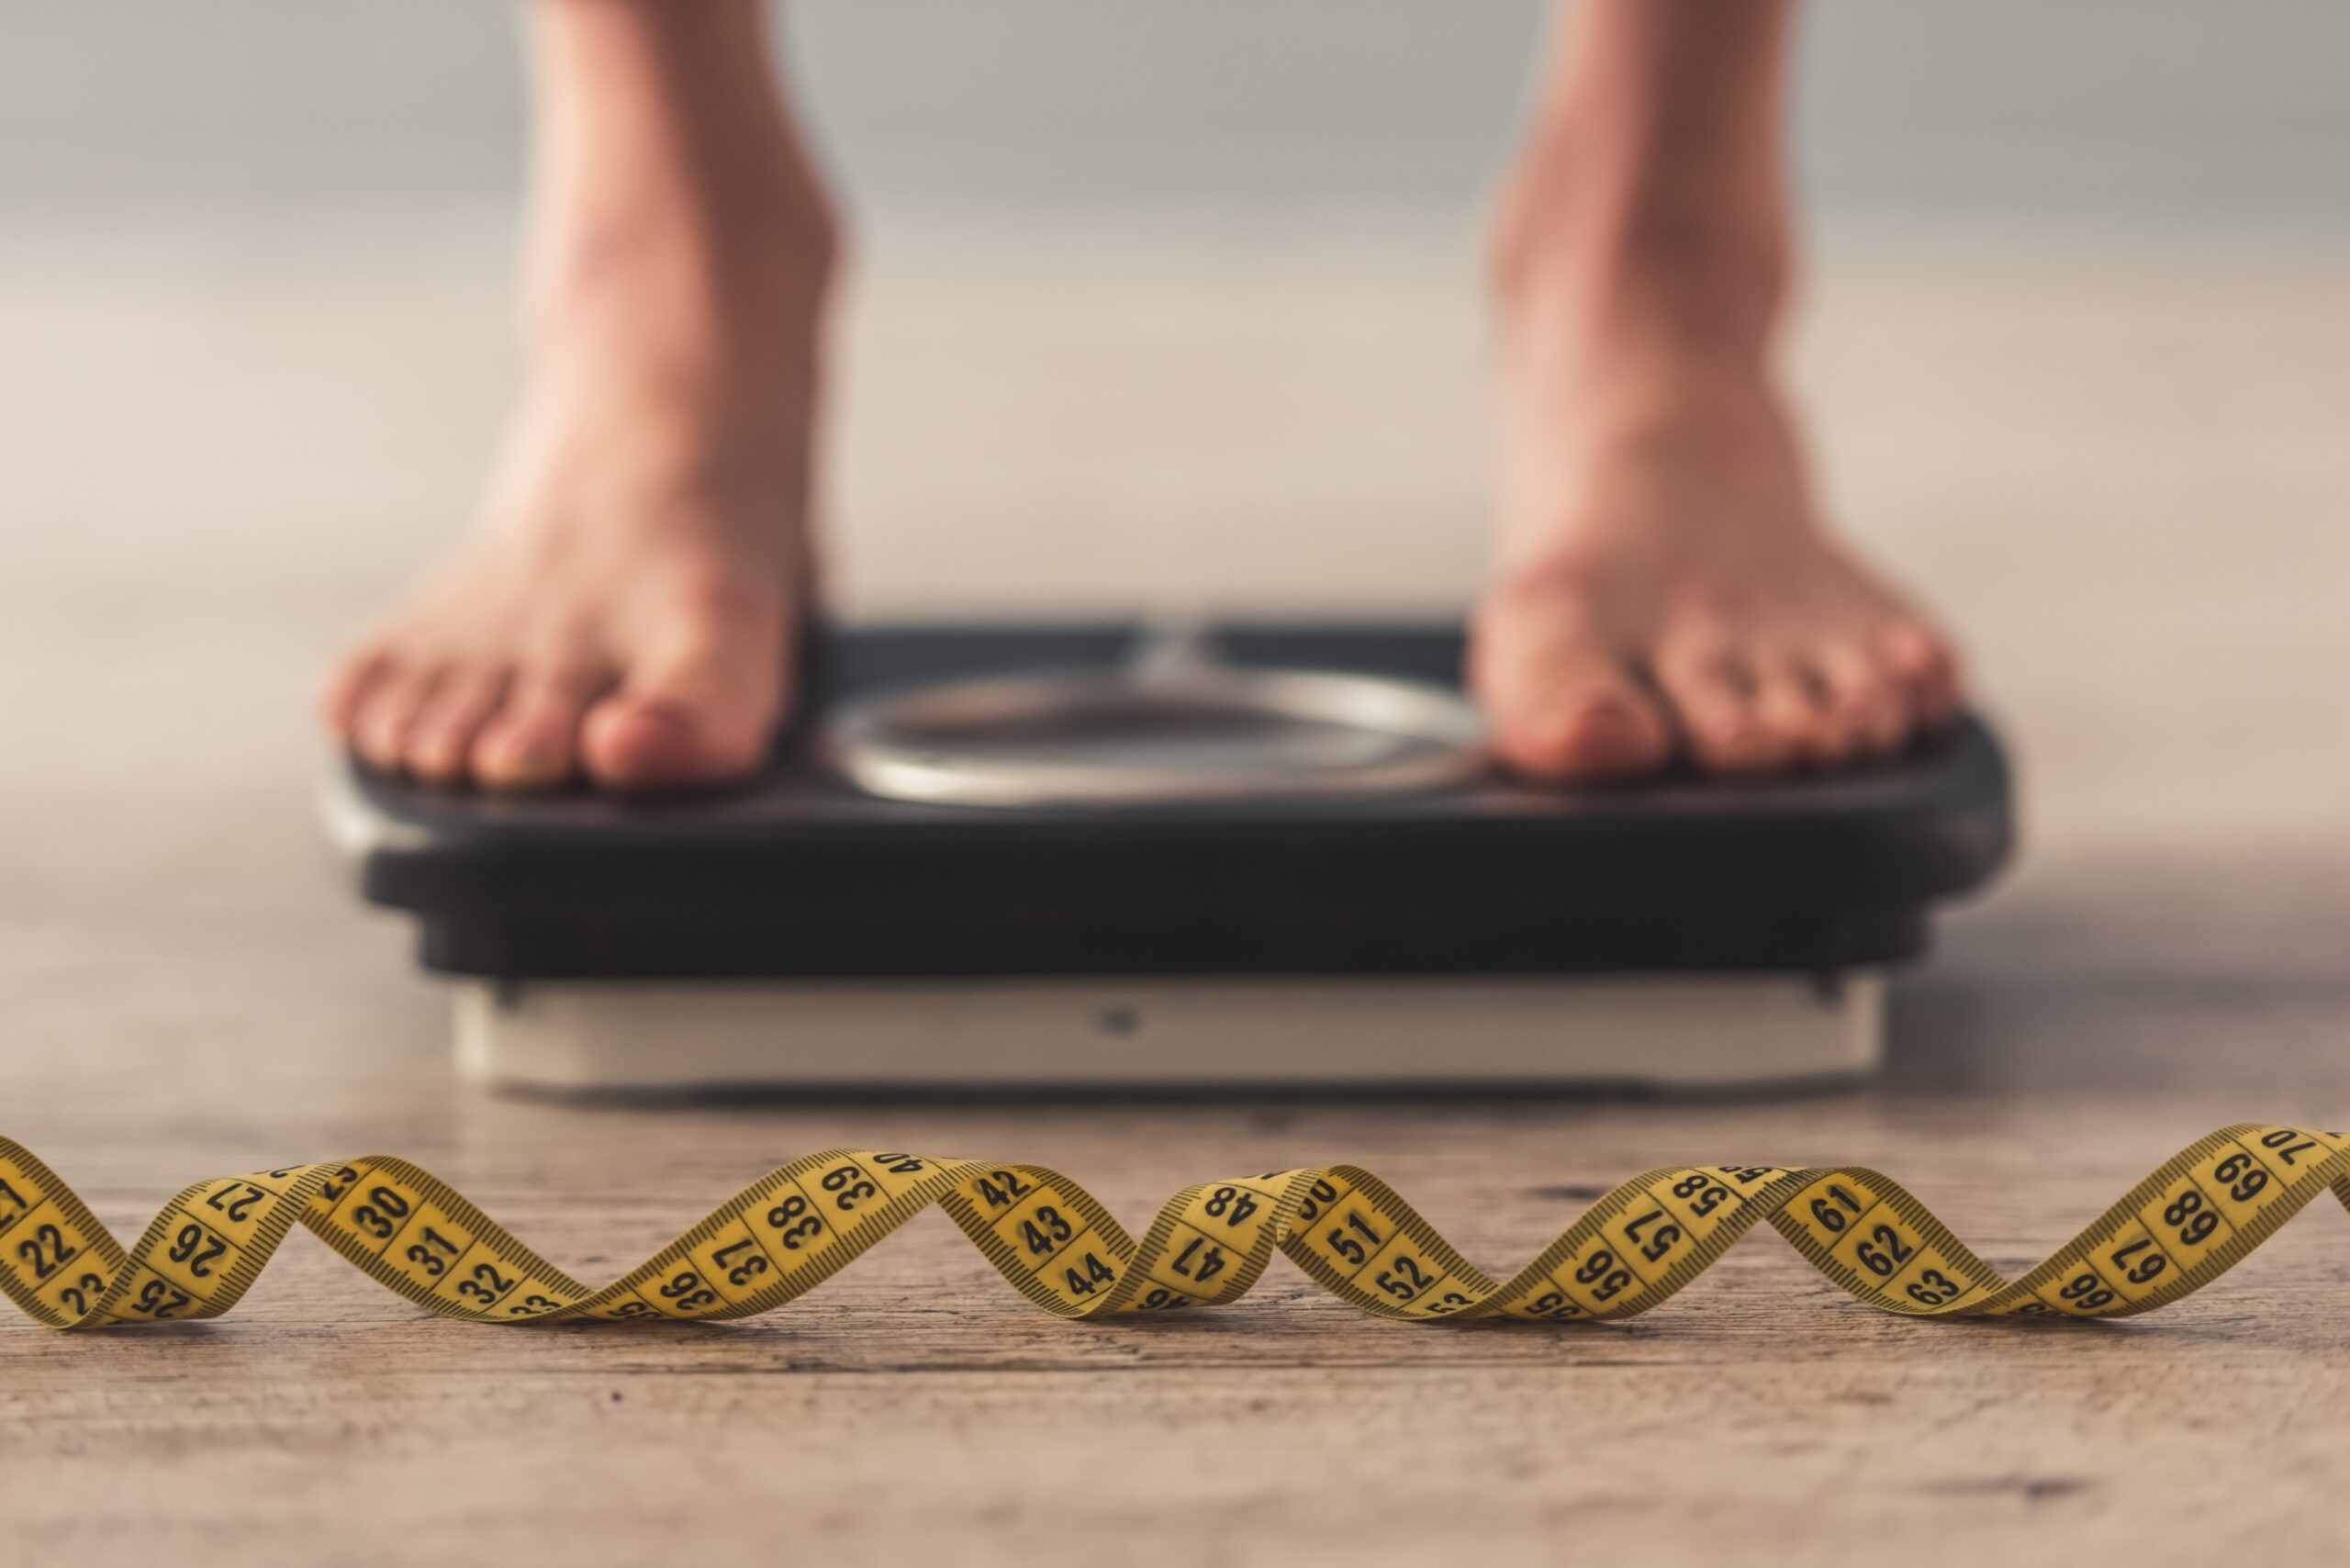 BMI alone may not be a sufficient indicator of metabolic health